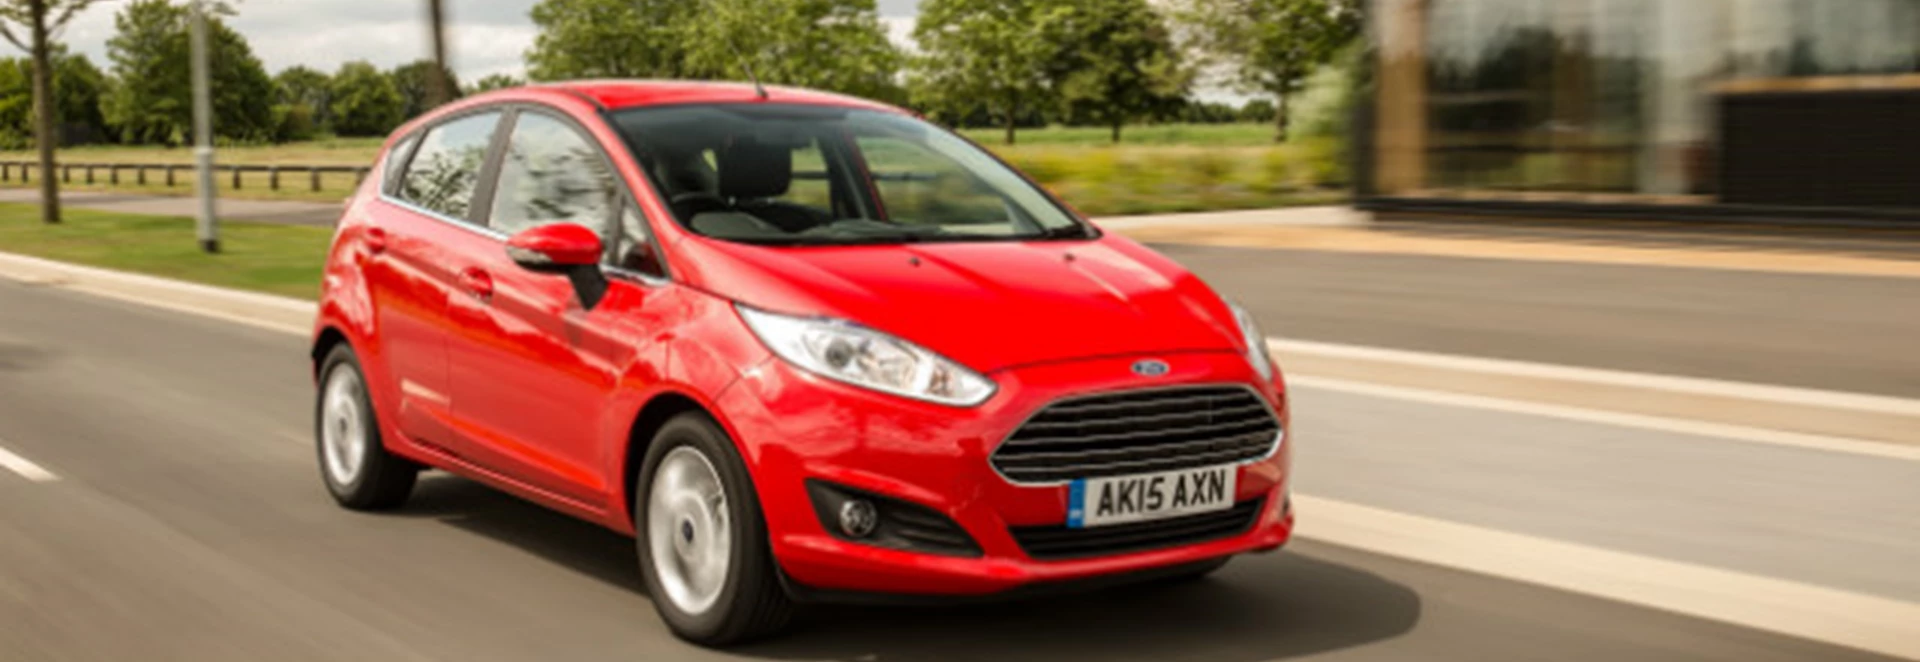 A buyer’s guide to the Ford Fiesta 